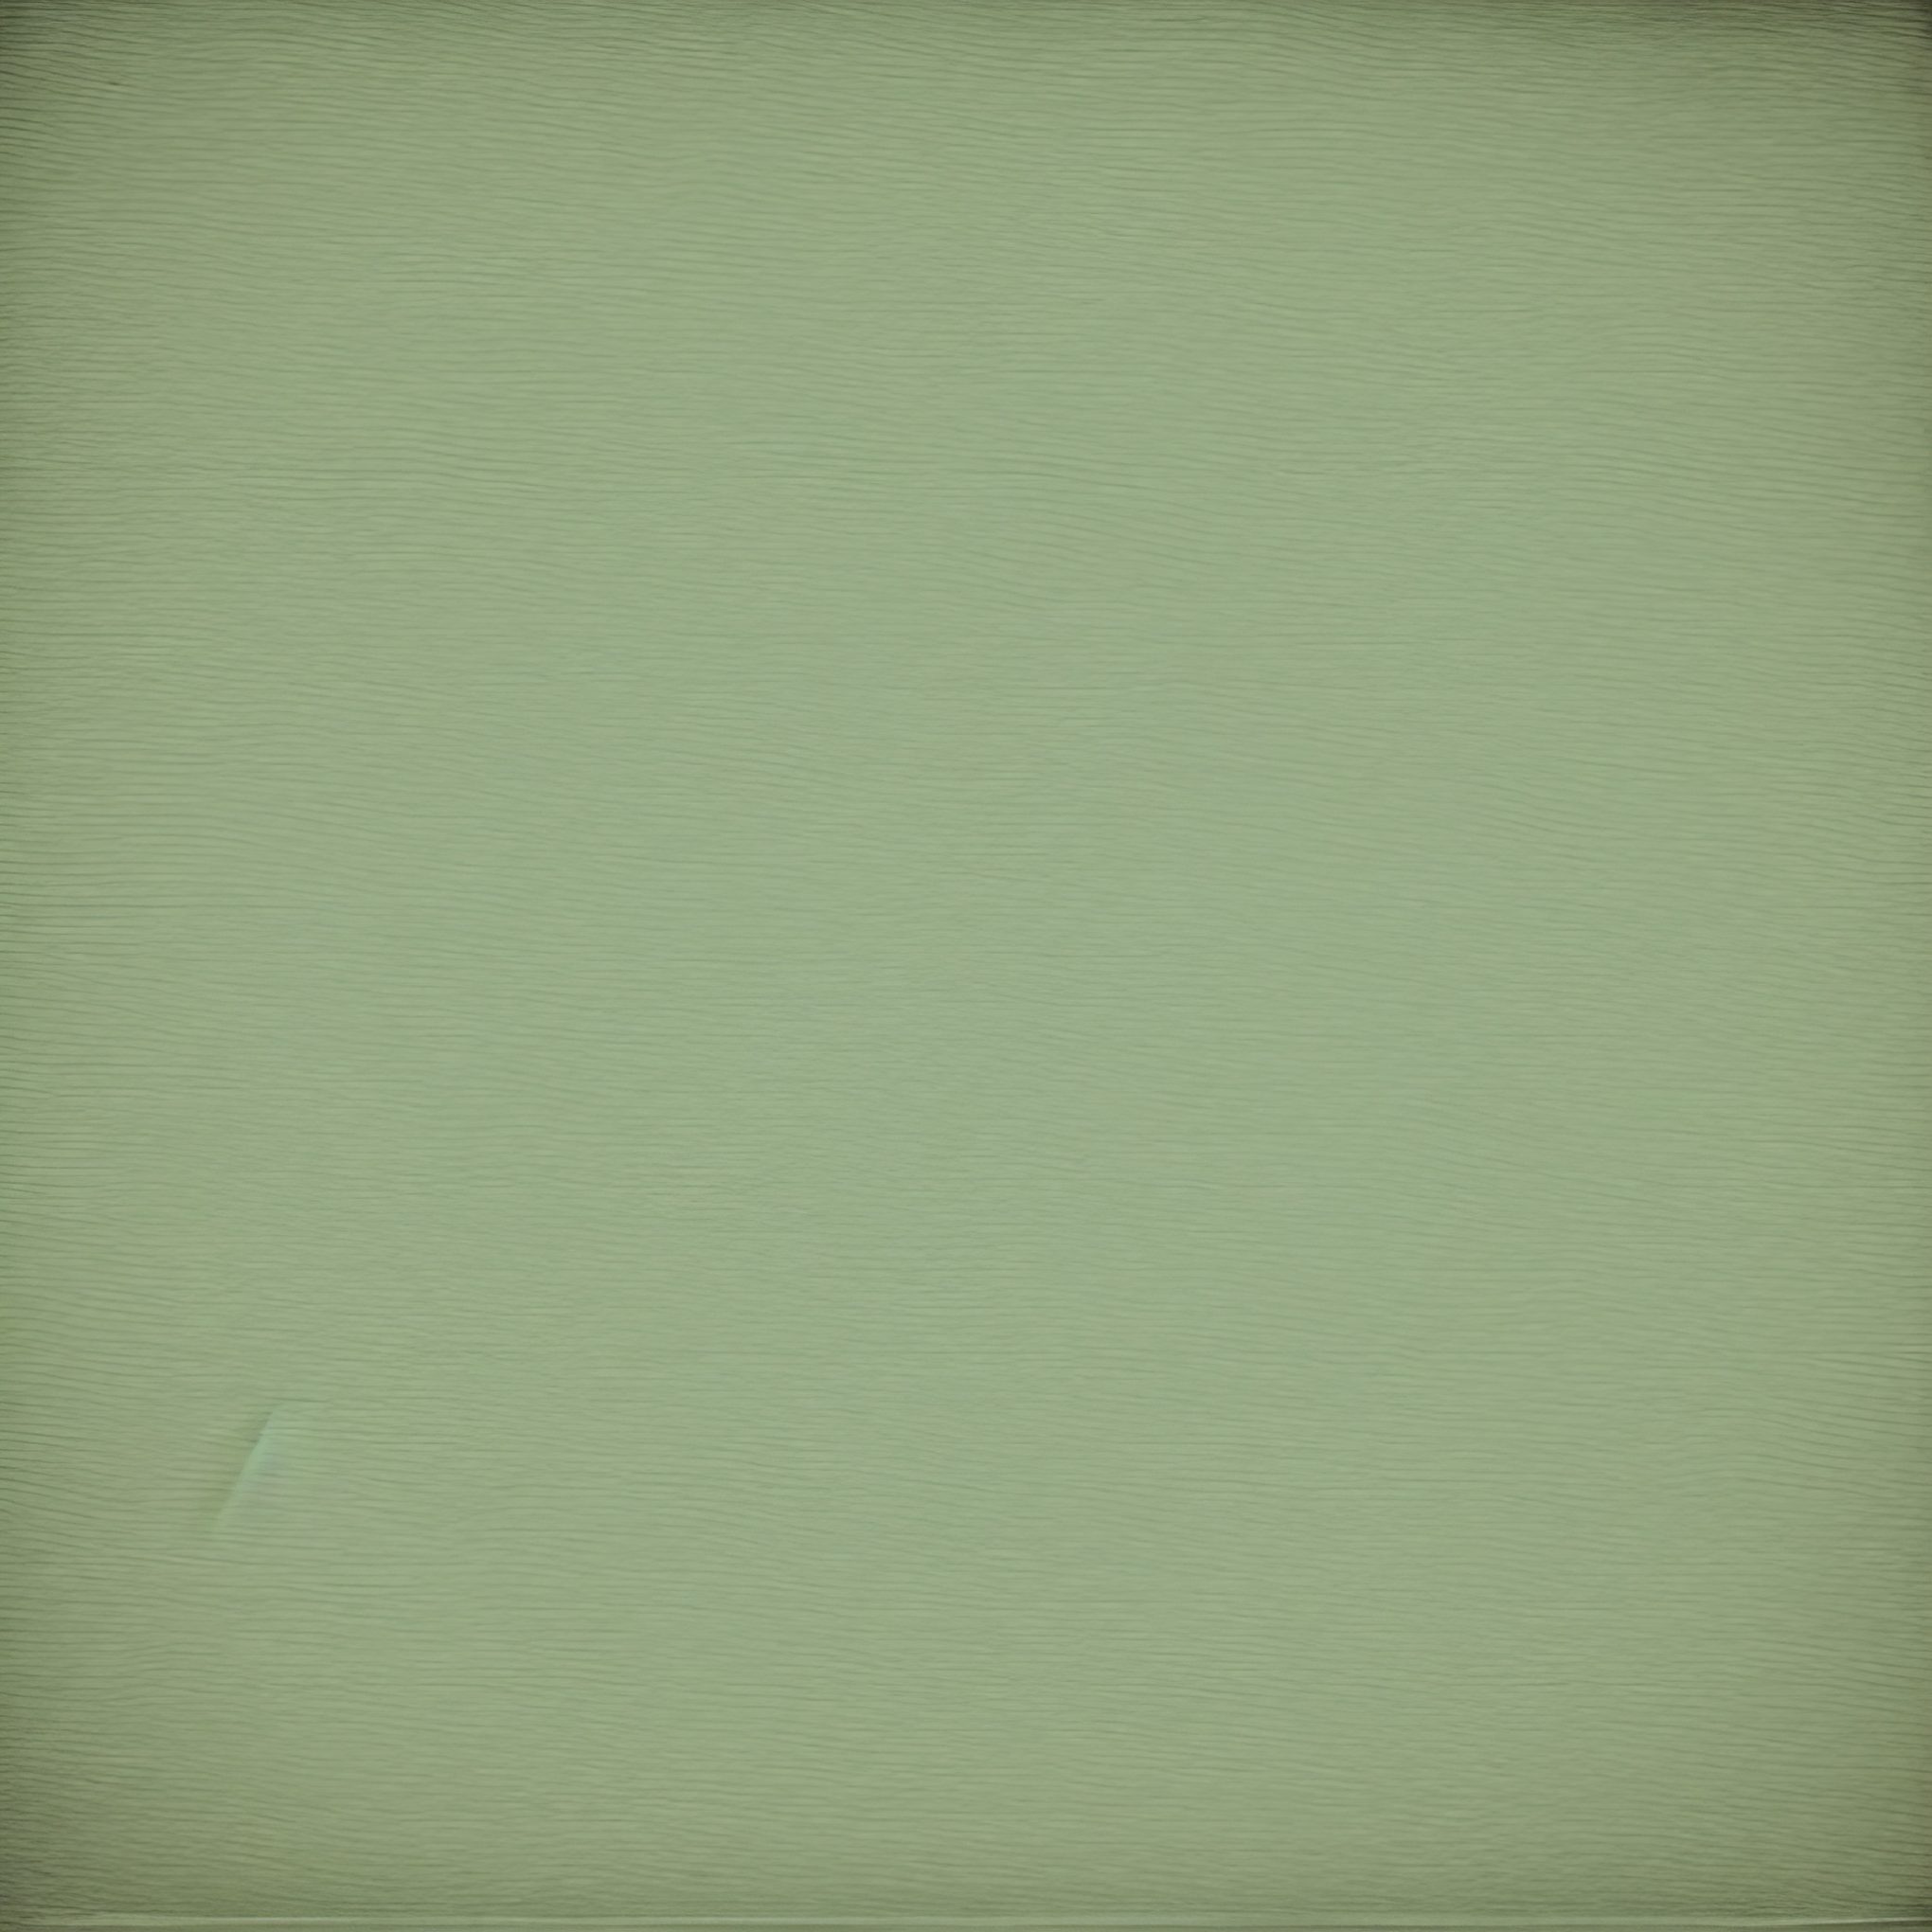 Pale Green textured background Free Stock Image